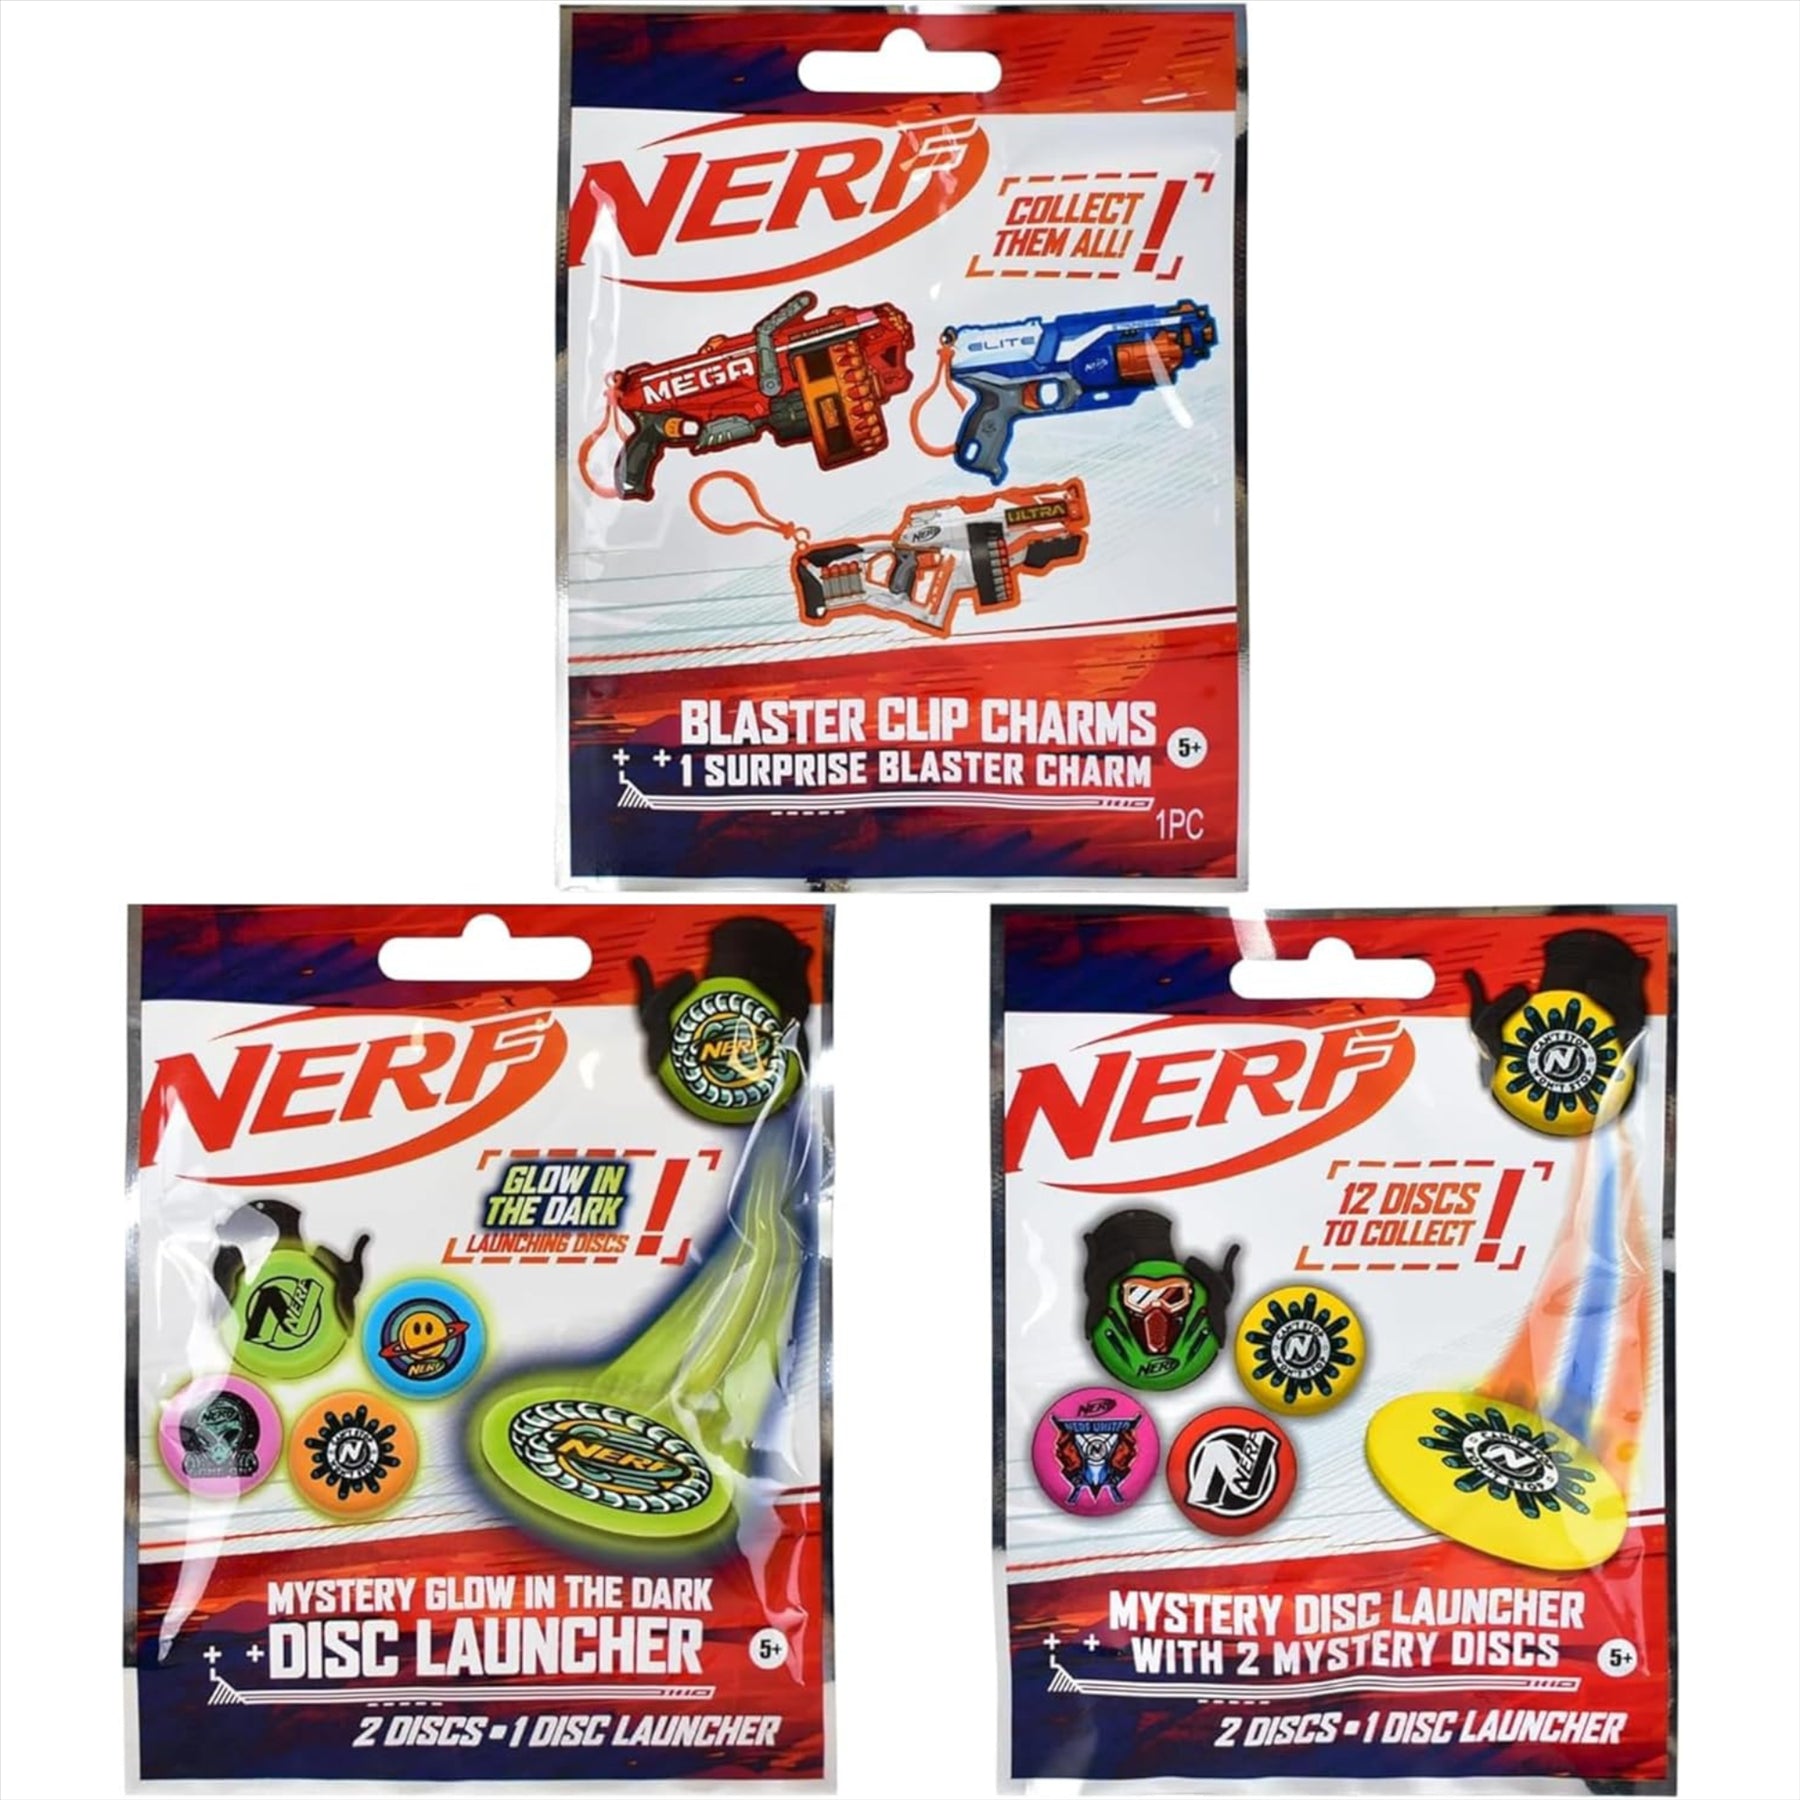 Ultimate Nerf Bundle - Roblox Dartbringer M2 Gun With Exclusive Code, Nerf Collectible Blind Bag Disc Launchers & Blaster Clip Charms Set - Gun and 6 Blind Bags - Toptoys2u